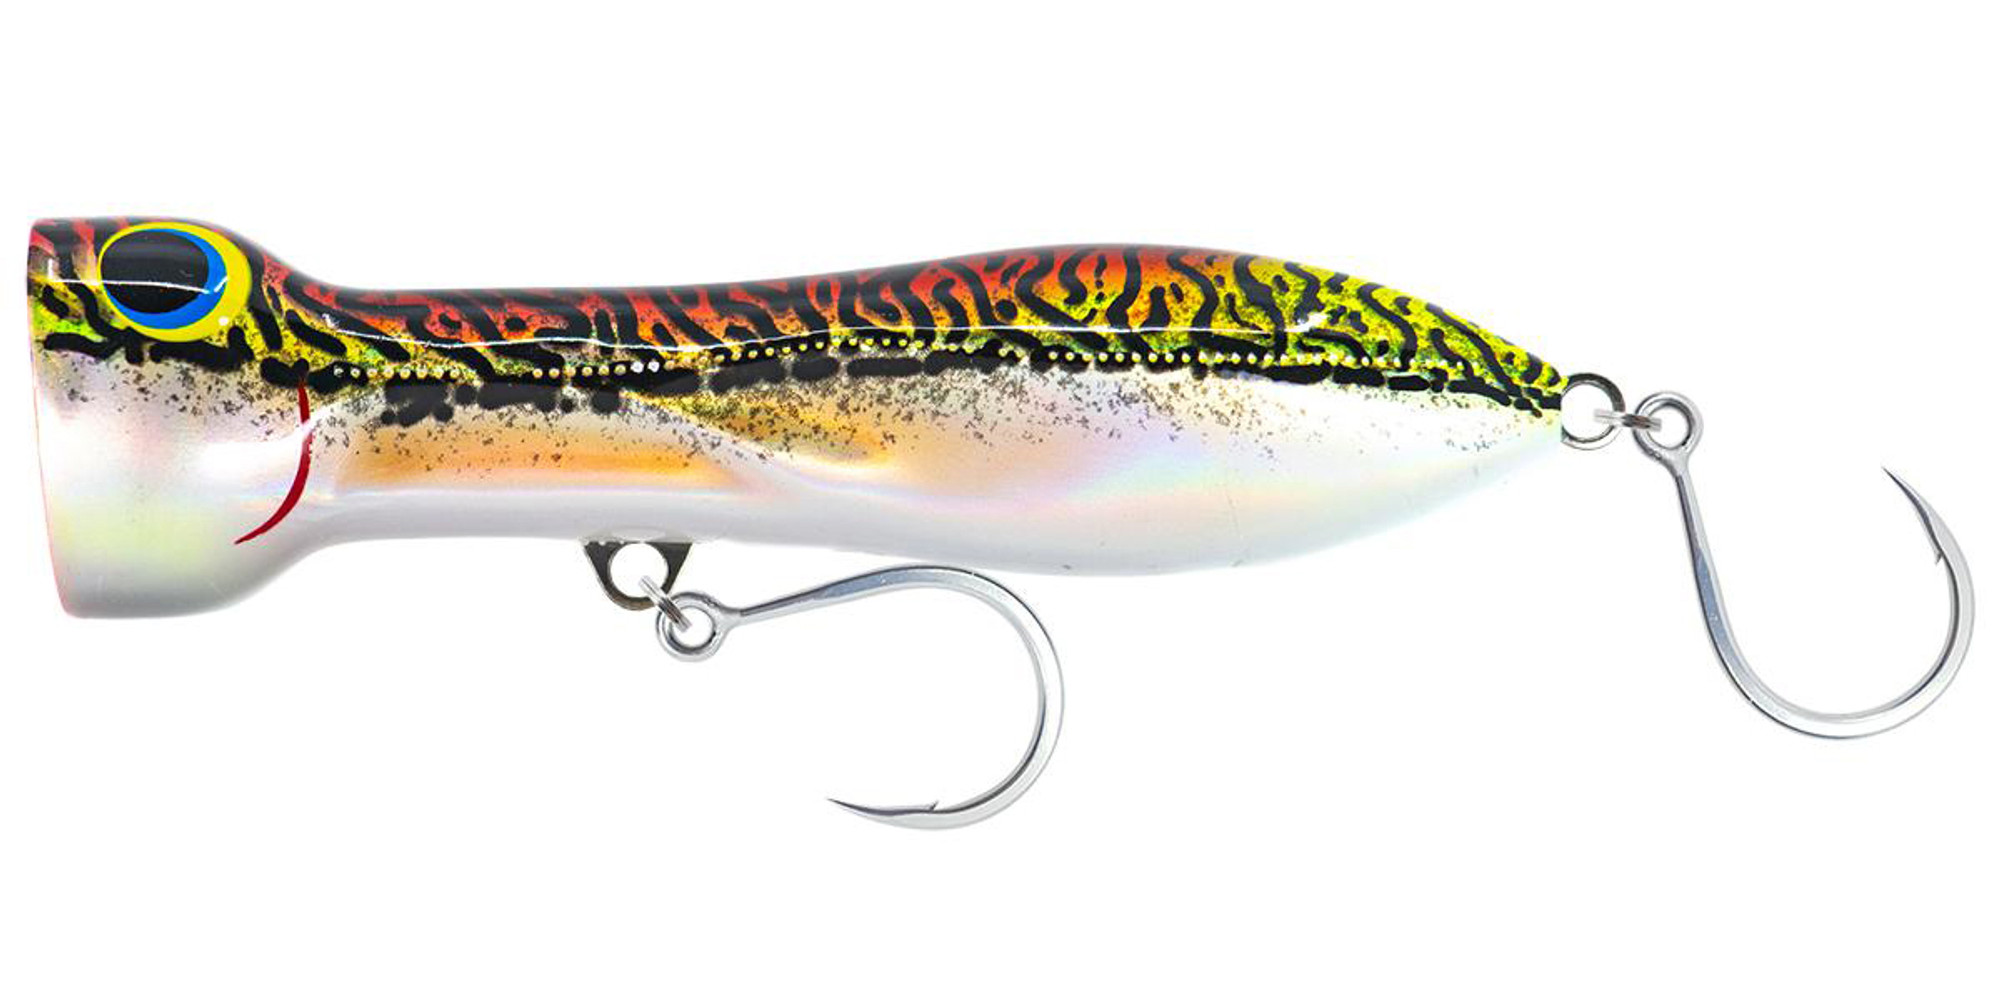 Nomad Design Chug Norris Popping Fishing Lure (Color: Chartreuse